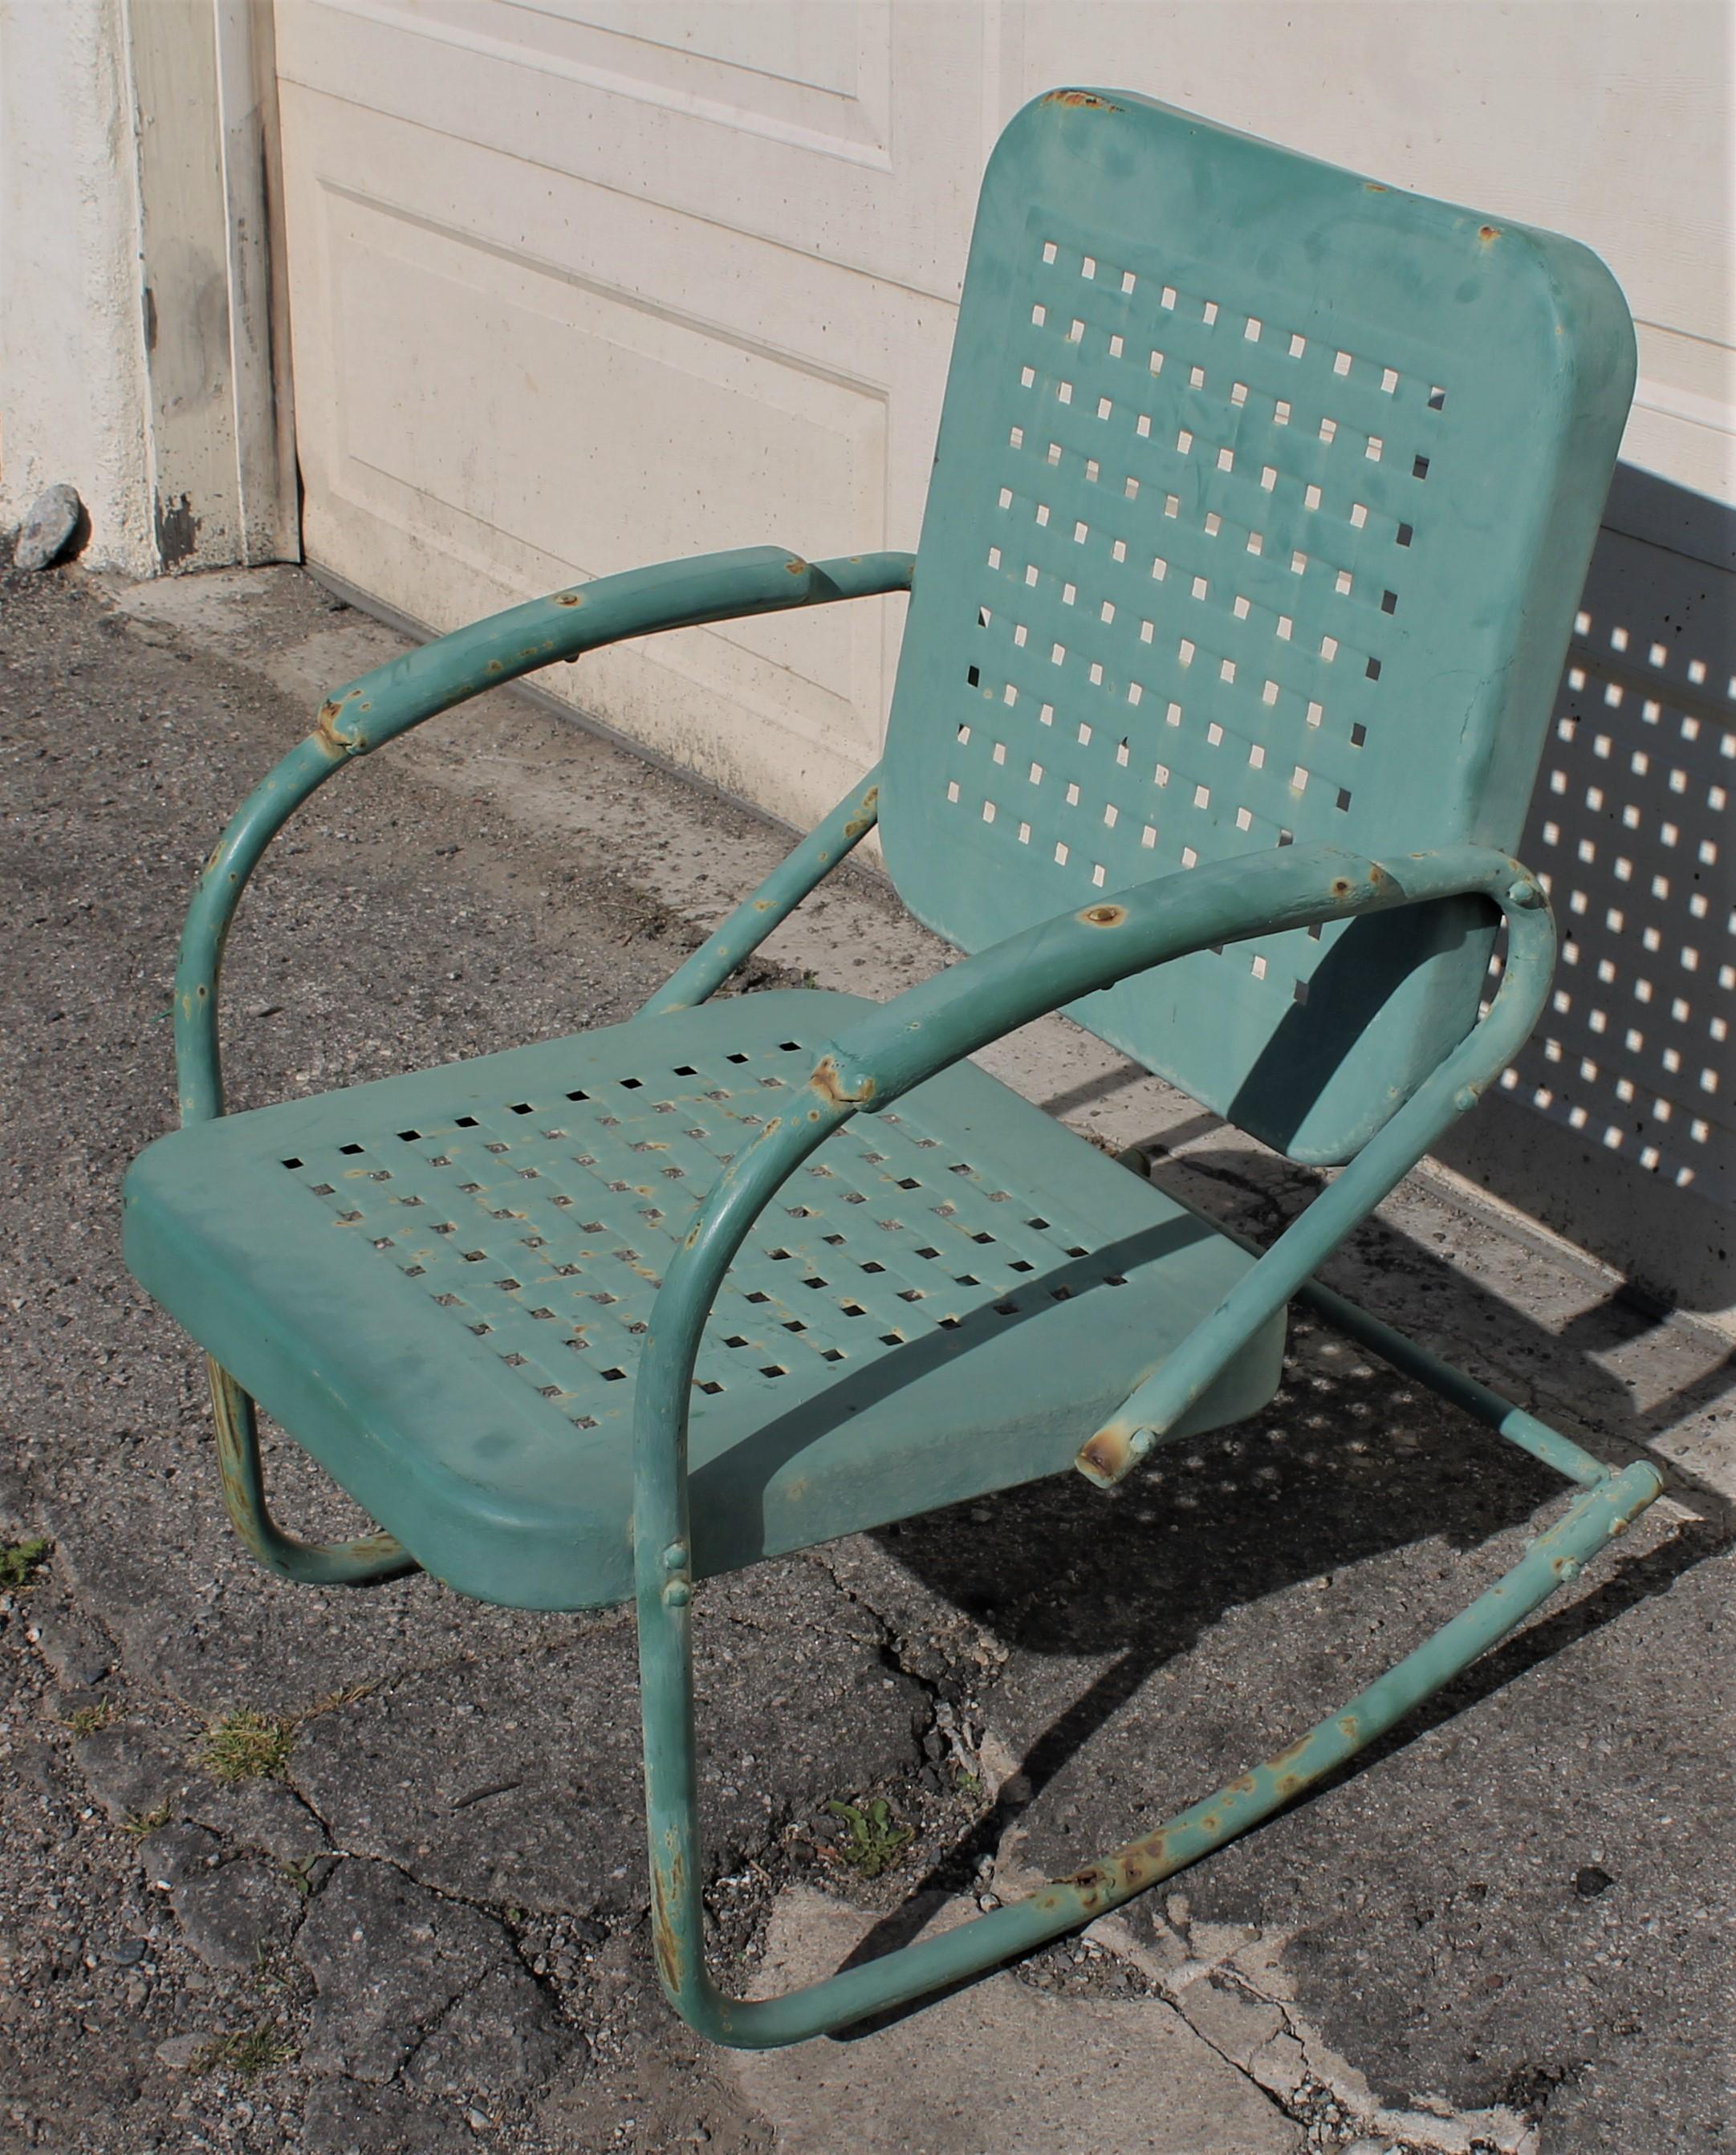 This rocking lawn chair in original painted teal surface metal. The condition is very good.